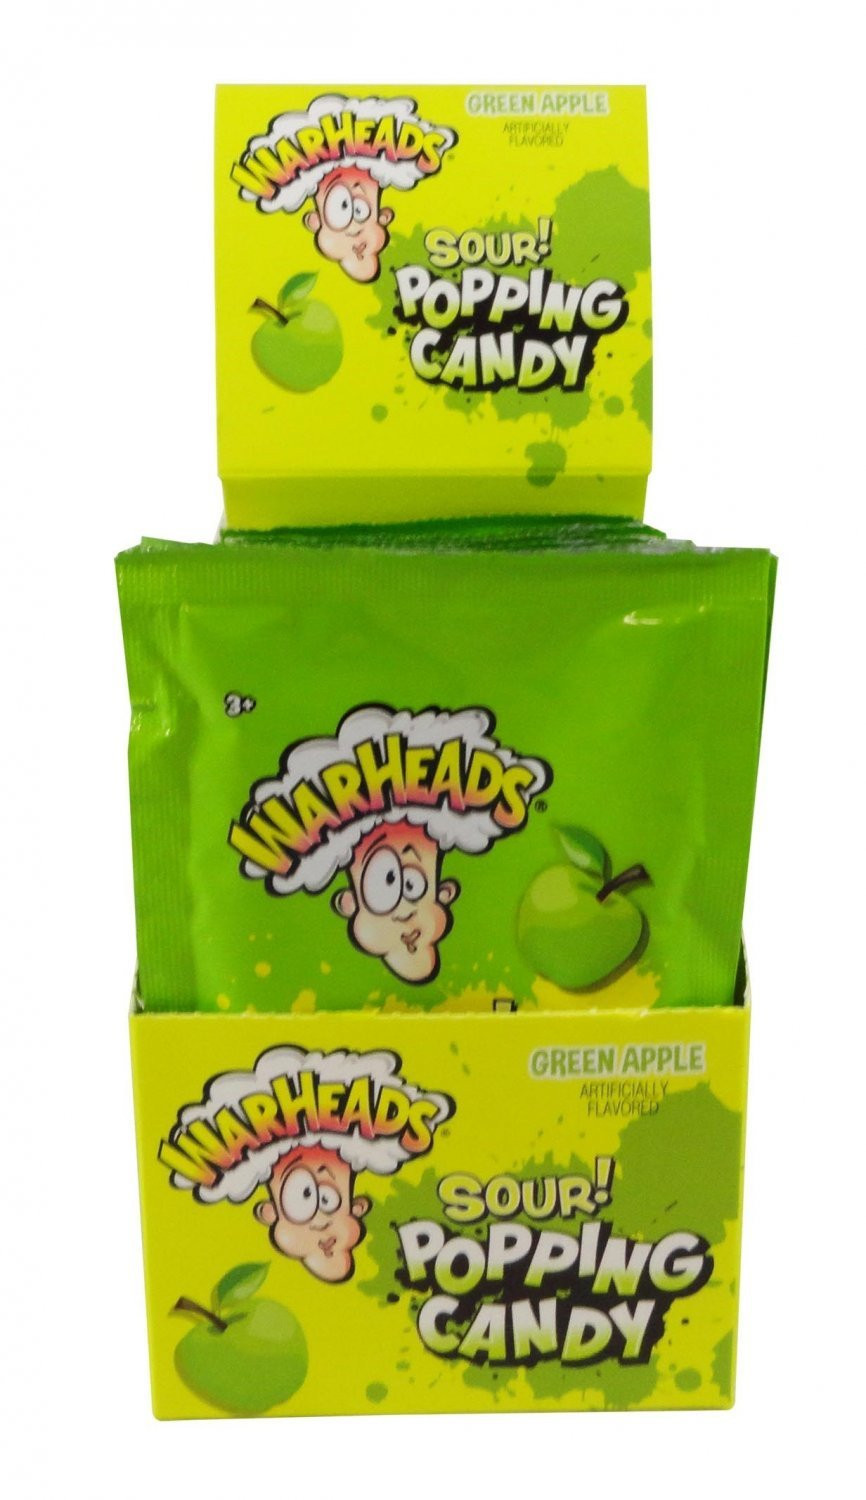 WarHeads WarHeads SOUR Green Apple Popping Candy Single Pouch .33oz. 